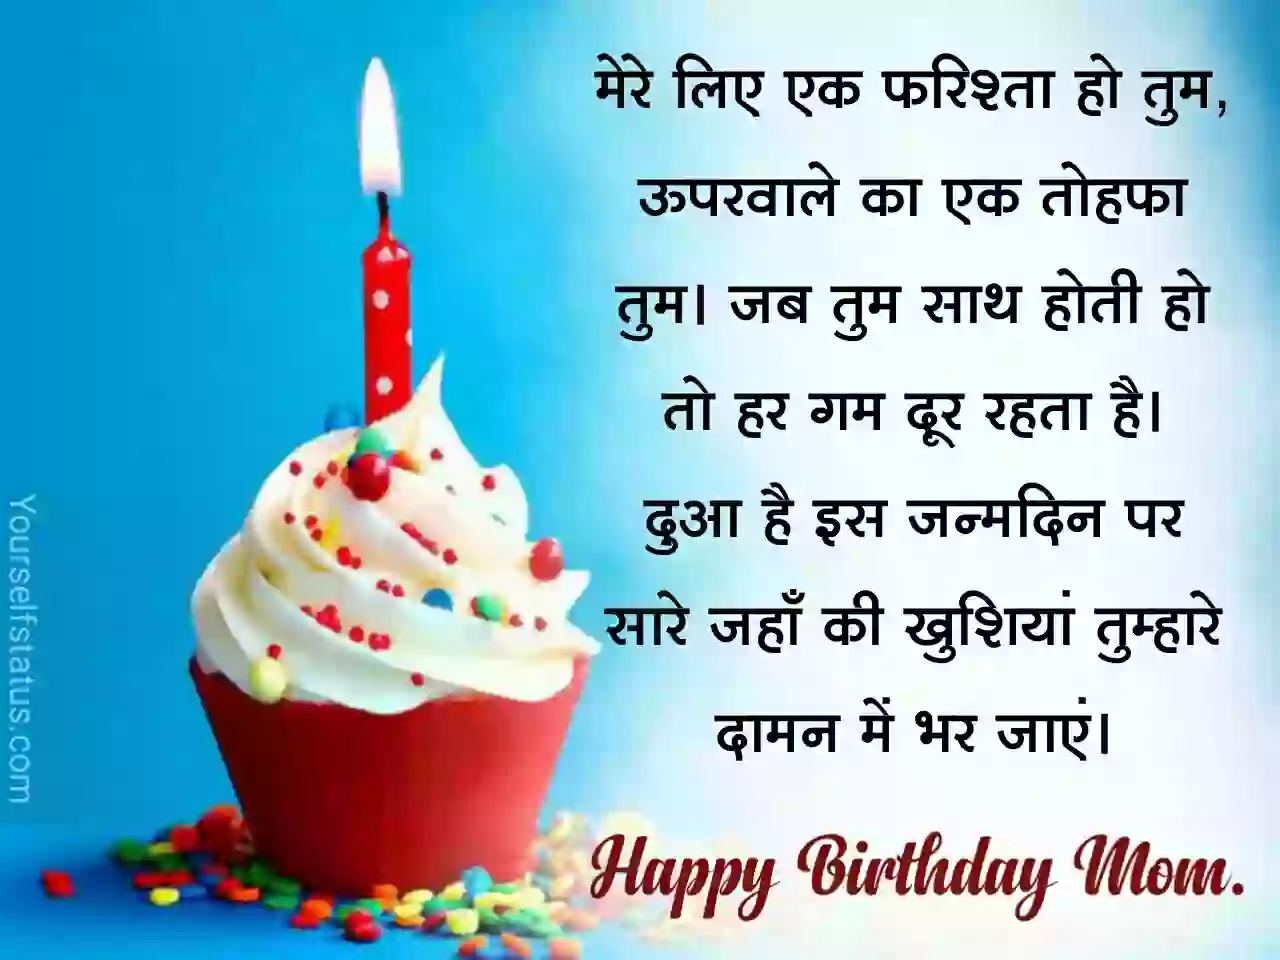 Birthday messages for mother in hindi